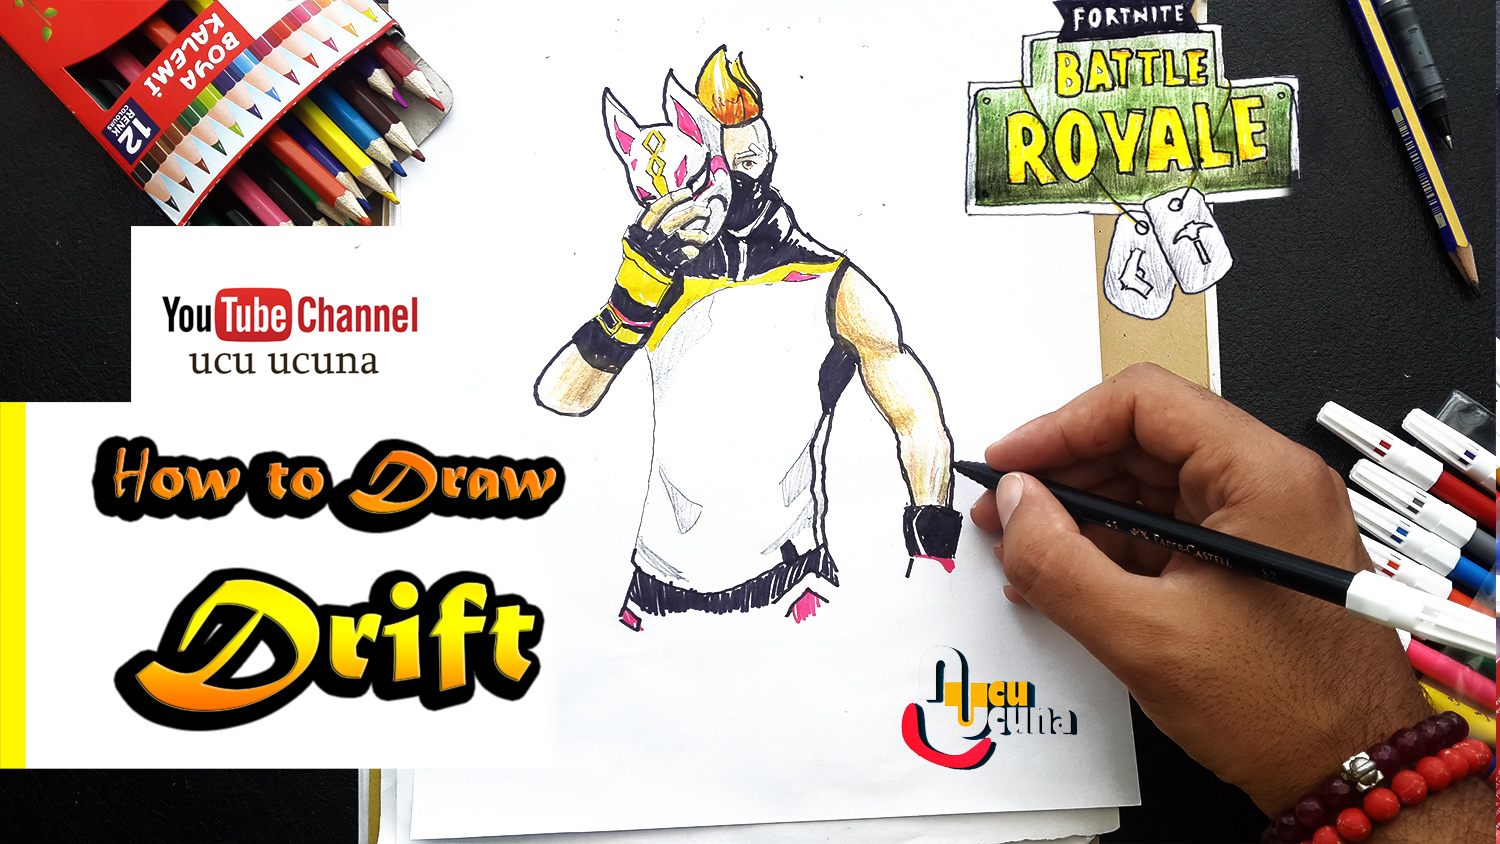 How to draw drift tutorial youtube channel name is ucu ucuna learn how to draw drift from fortnite step by step beginner drawing tutorial of the drift skin from fortnite art tutorial kids for art